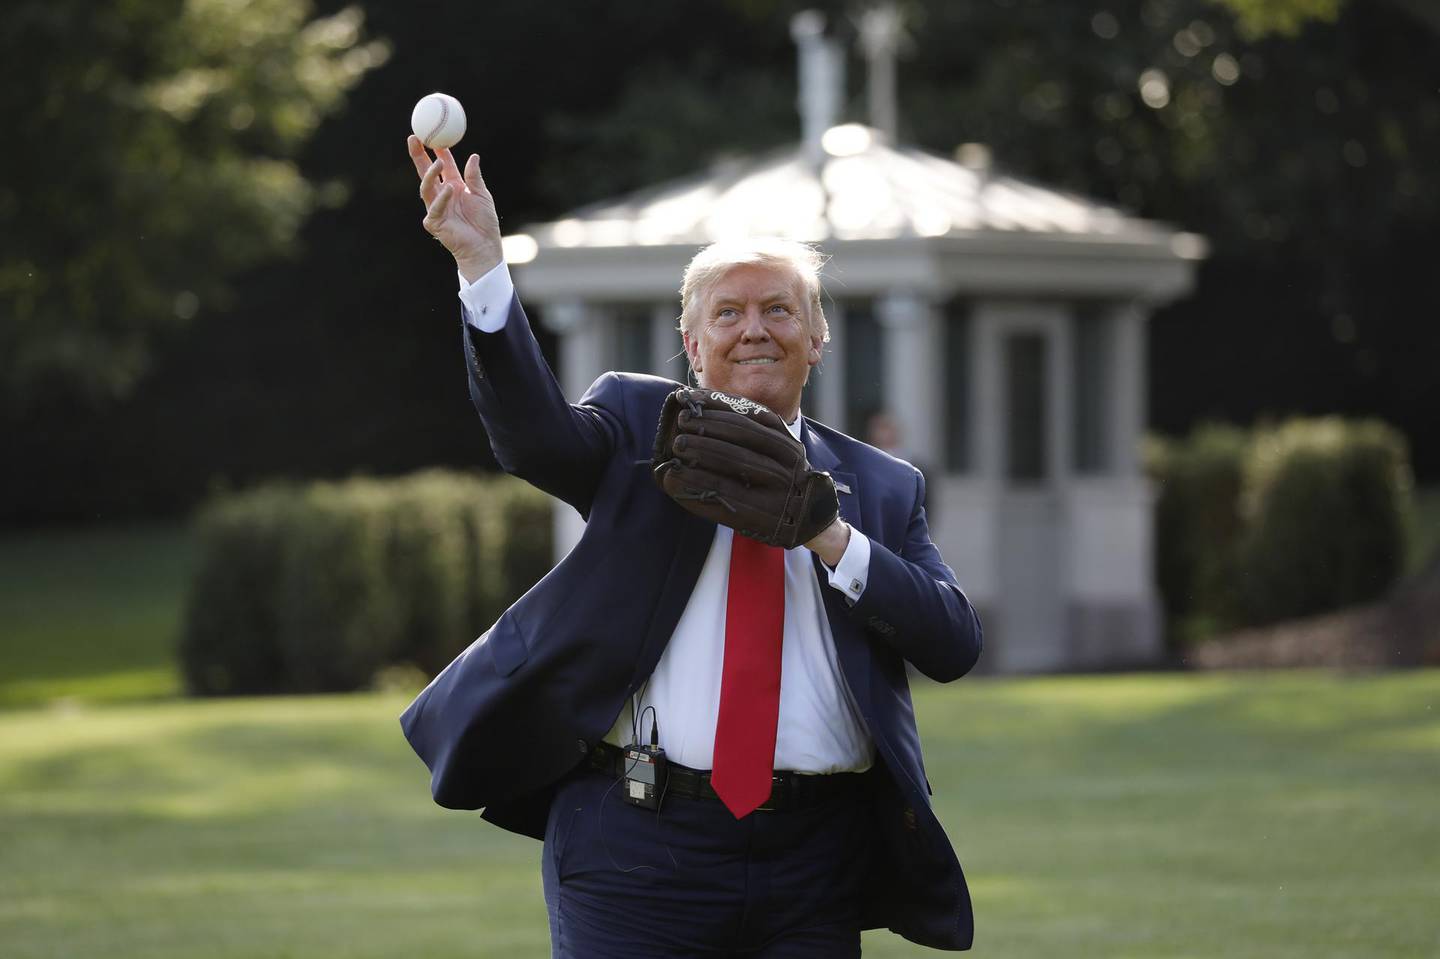 U.S. President Donald Trump throws a baseball on the South Lawn of the White House in Washington, D.C., U.S., on Thursday, July 23, 2020. Trump met with youth baseball players to celebrate Opening Day of the Major League Baseball (MLB) season. Photographer: Yuri Gripas/Abaca/Bloomberg